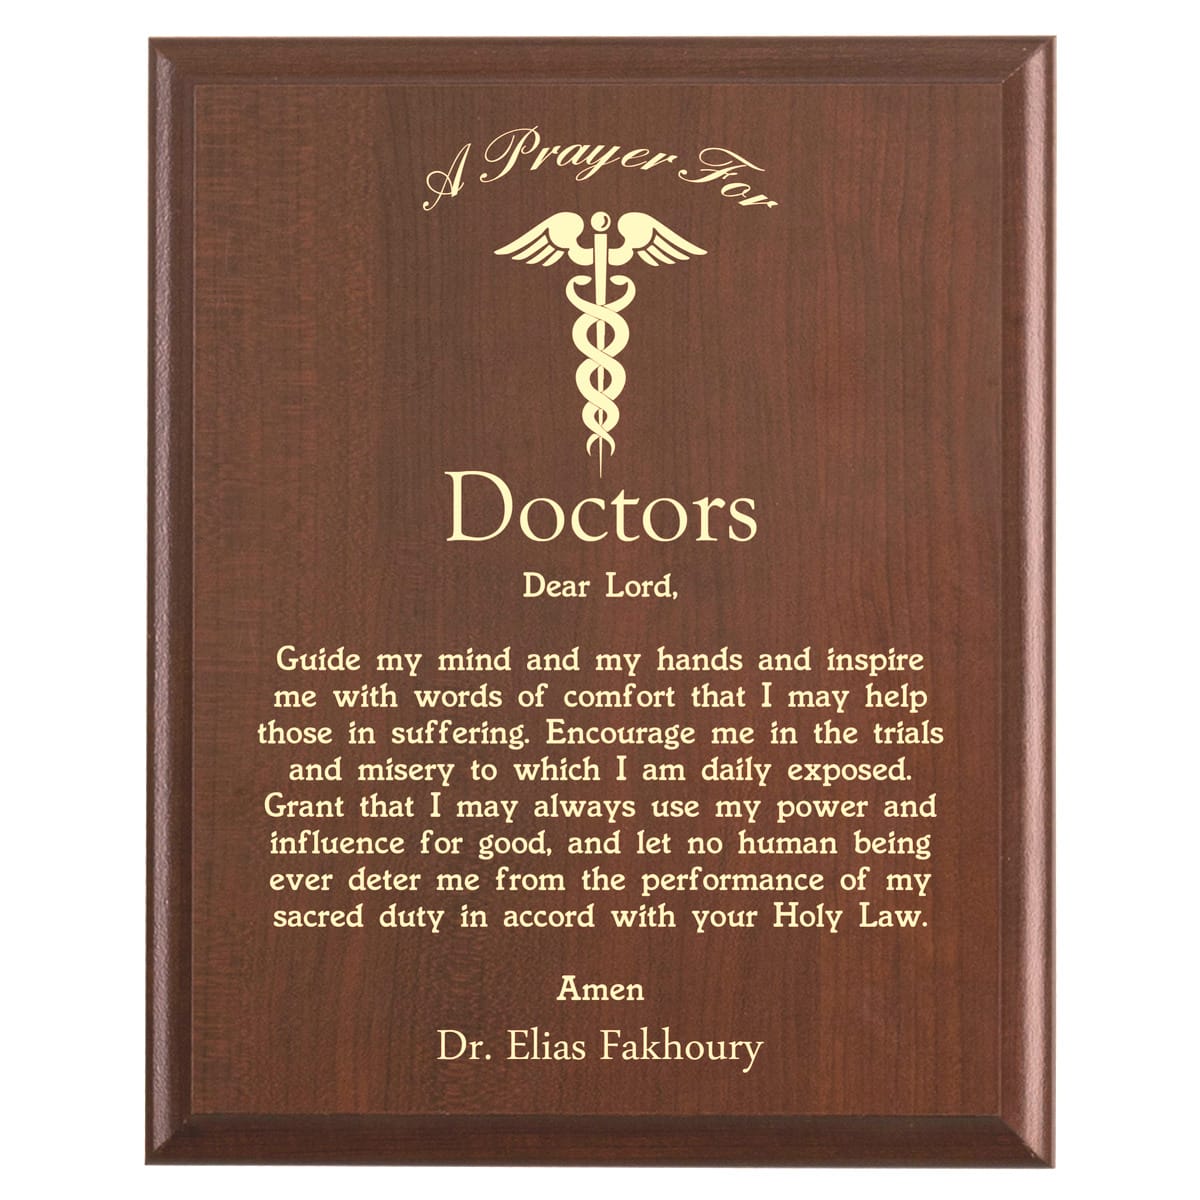 Plaque photo: Doctors Prayer Plaque design with free personalization. Wood style finish with customized text.